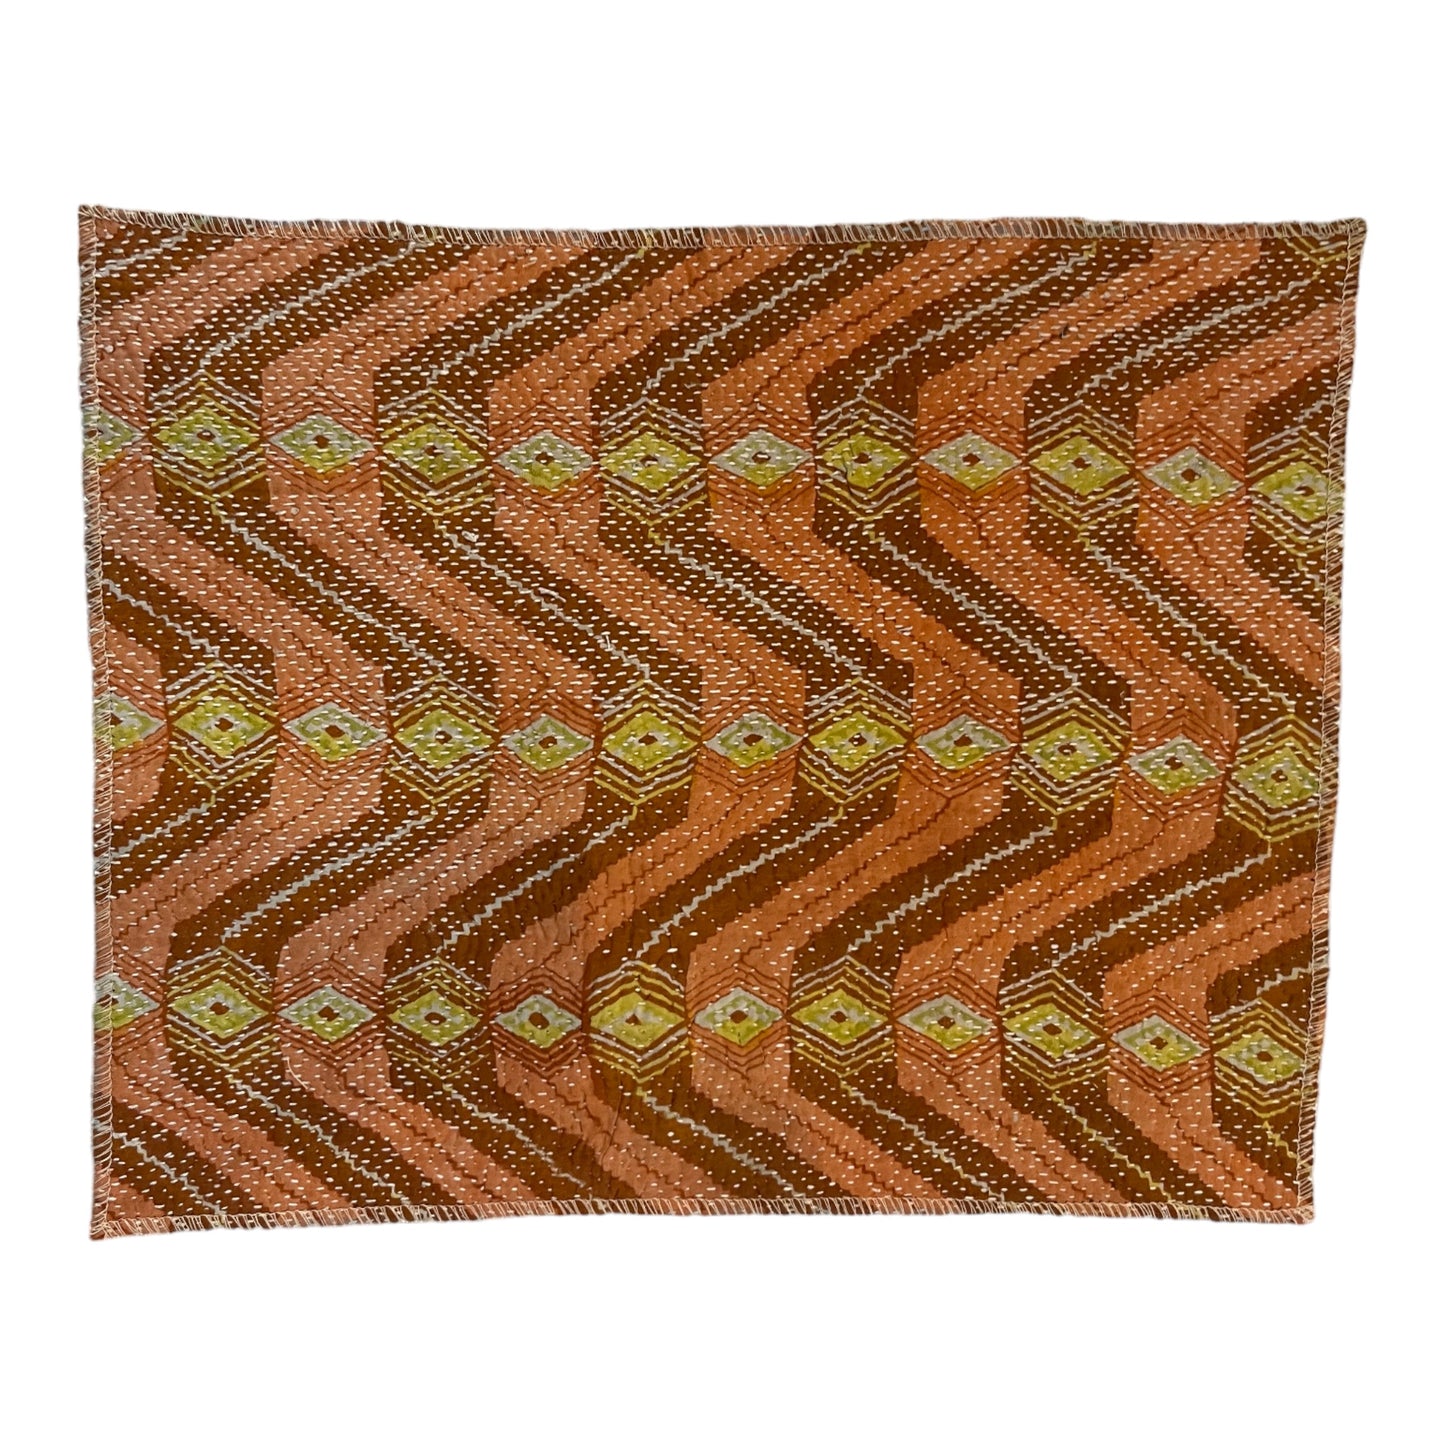 Coral and ochre kantha placemat